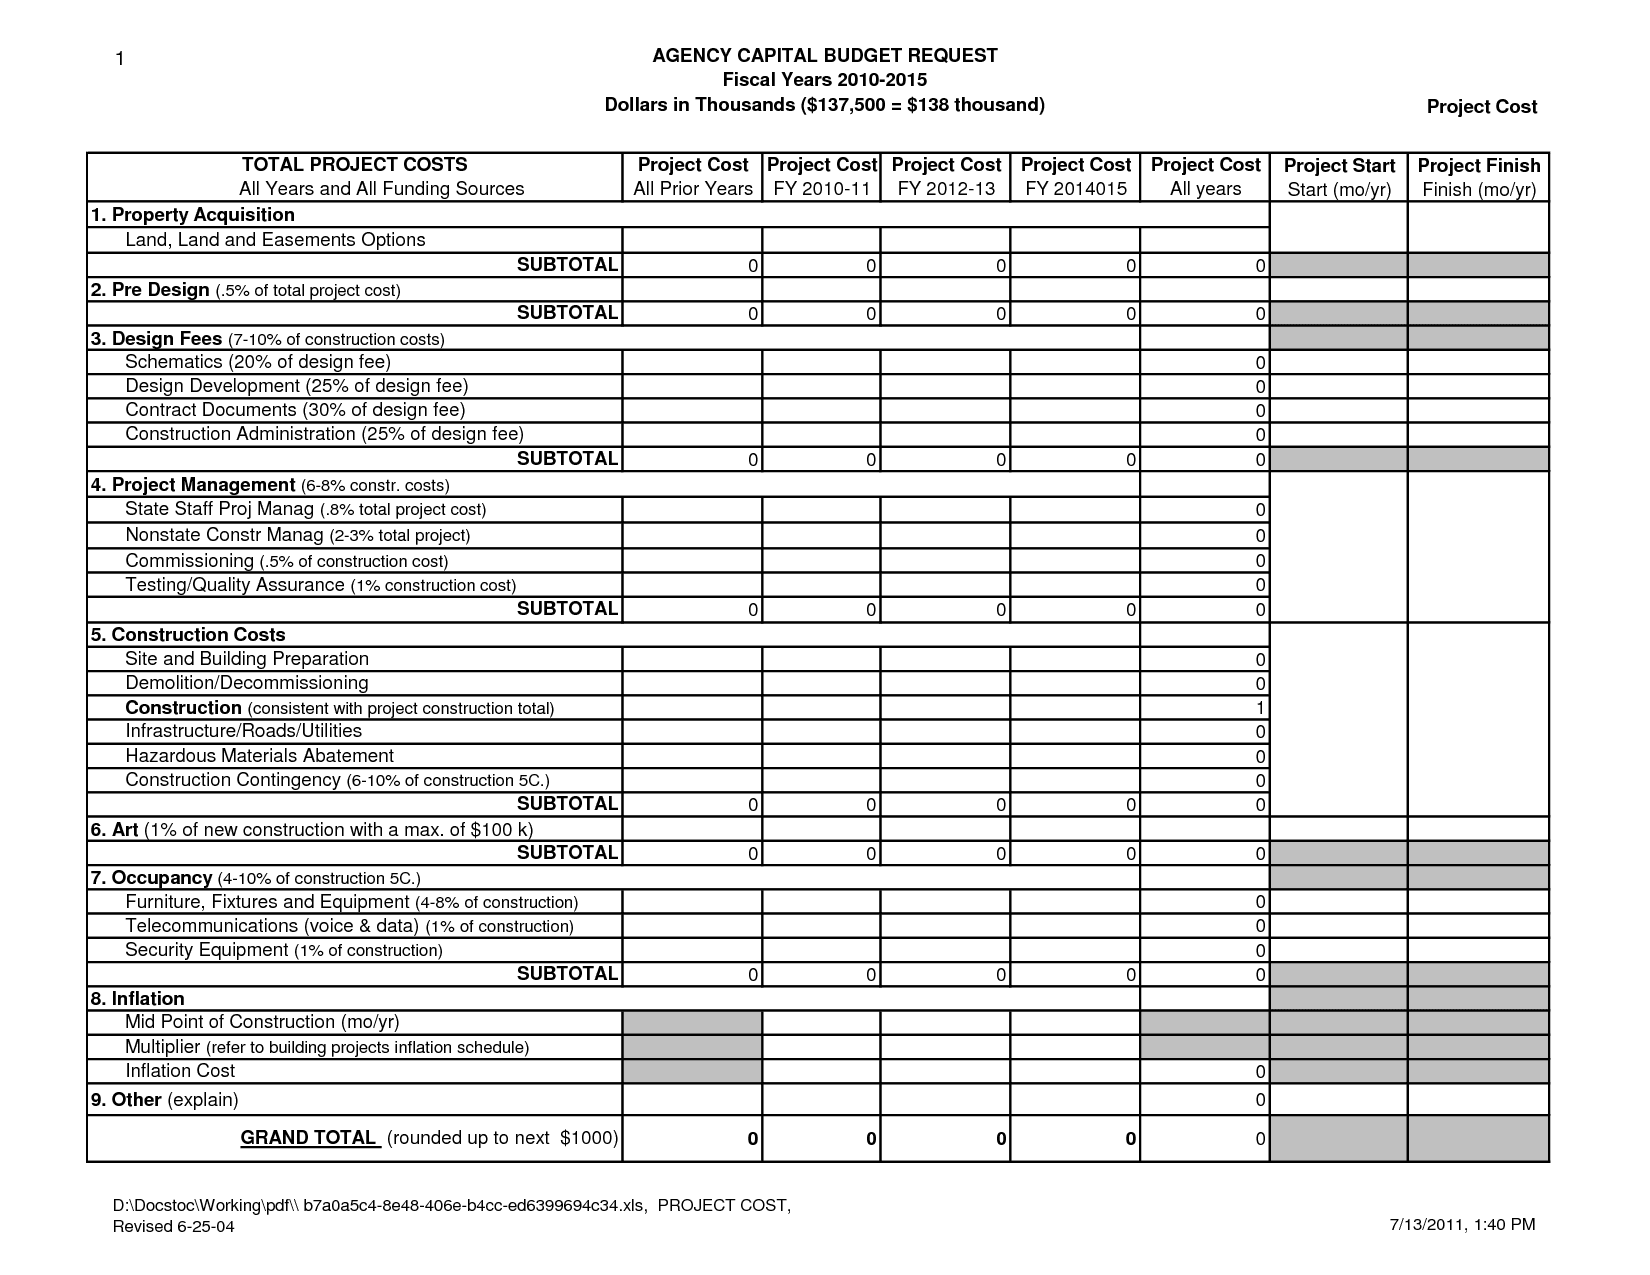 Project Timeline Excel Template Free